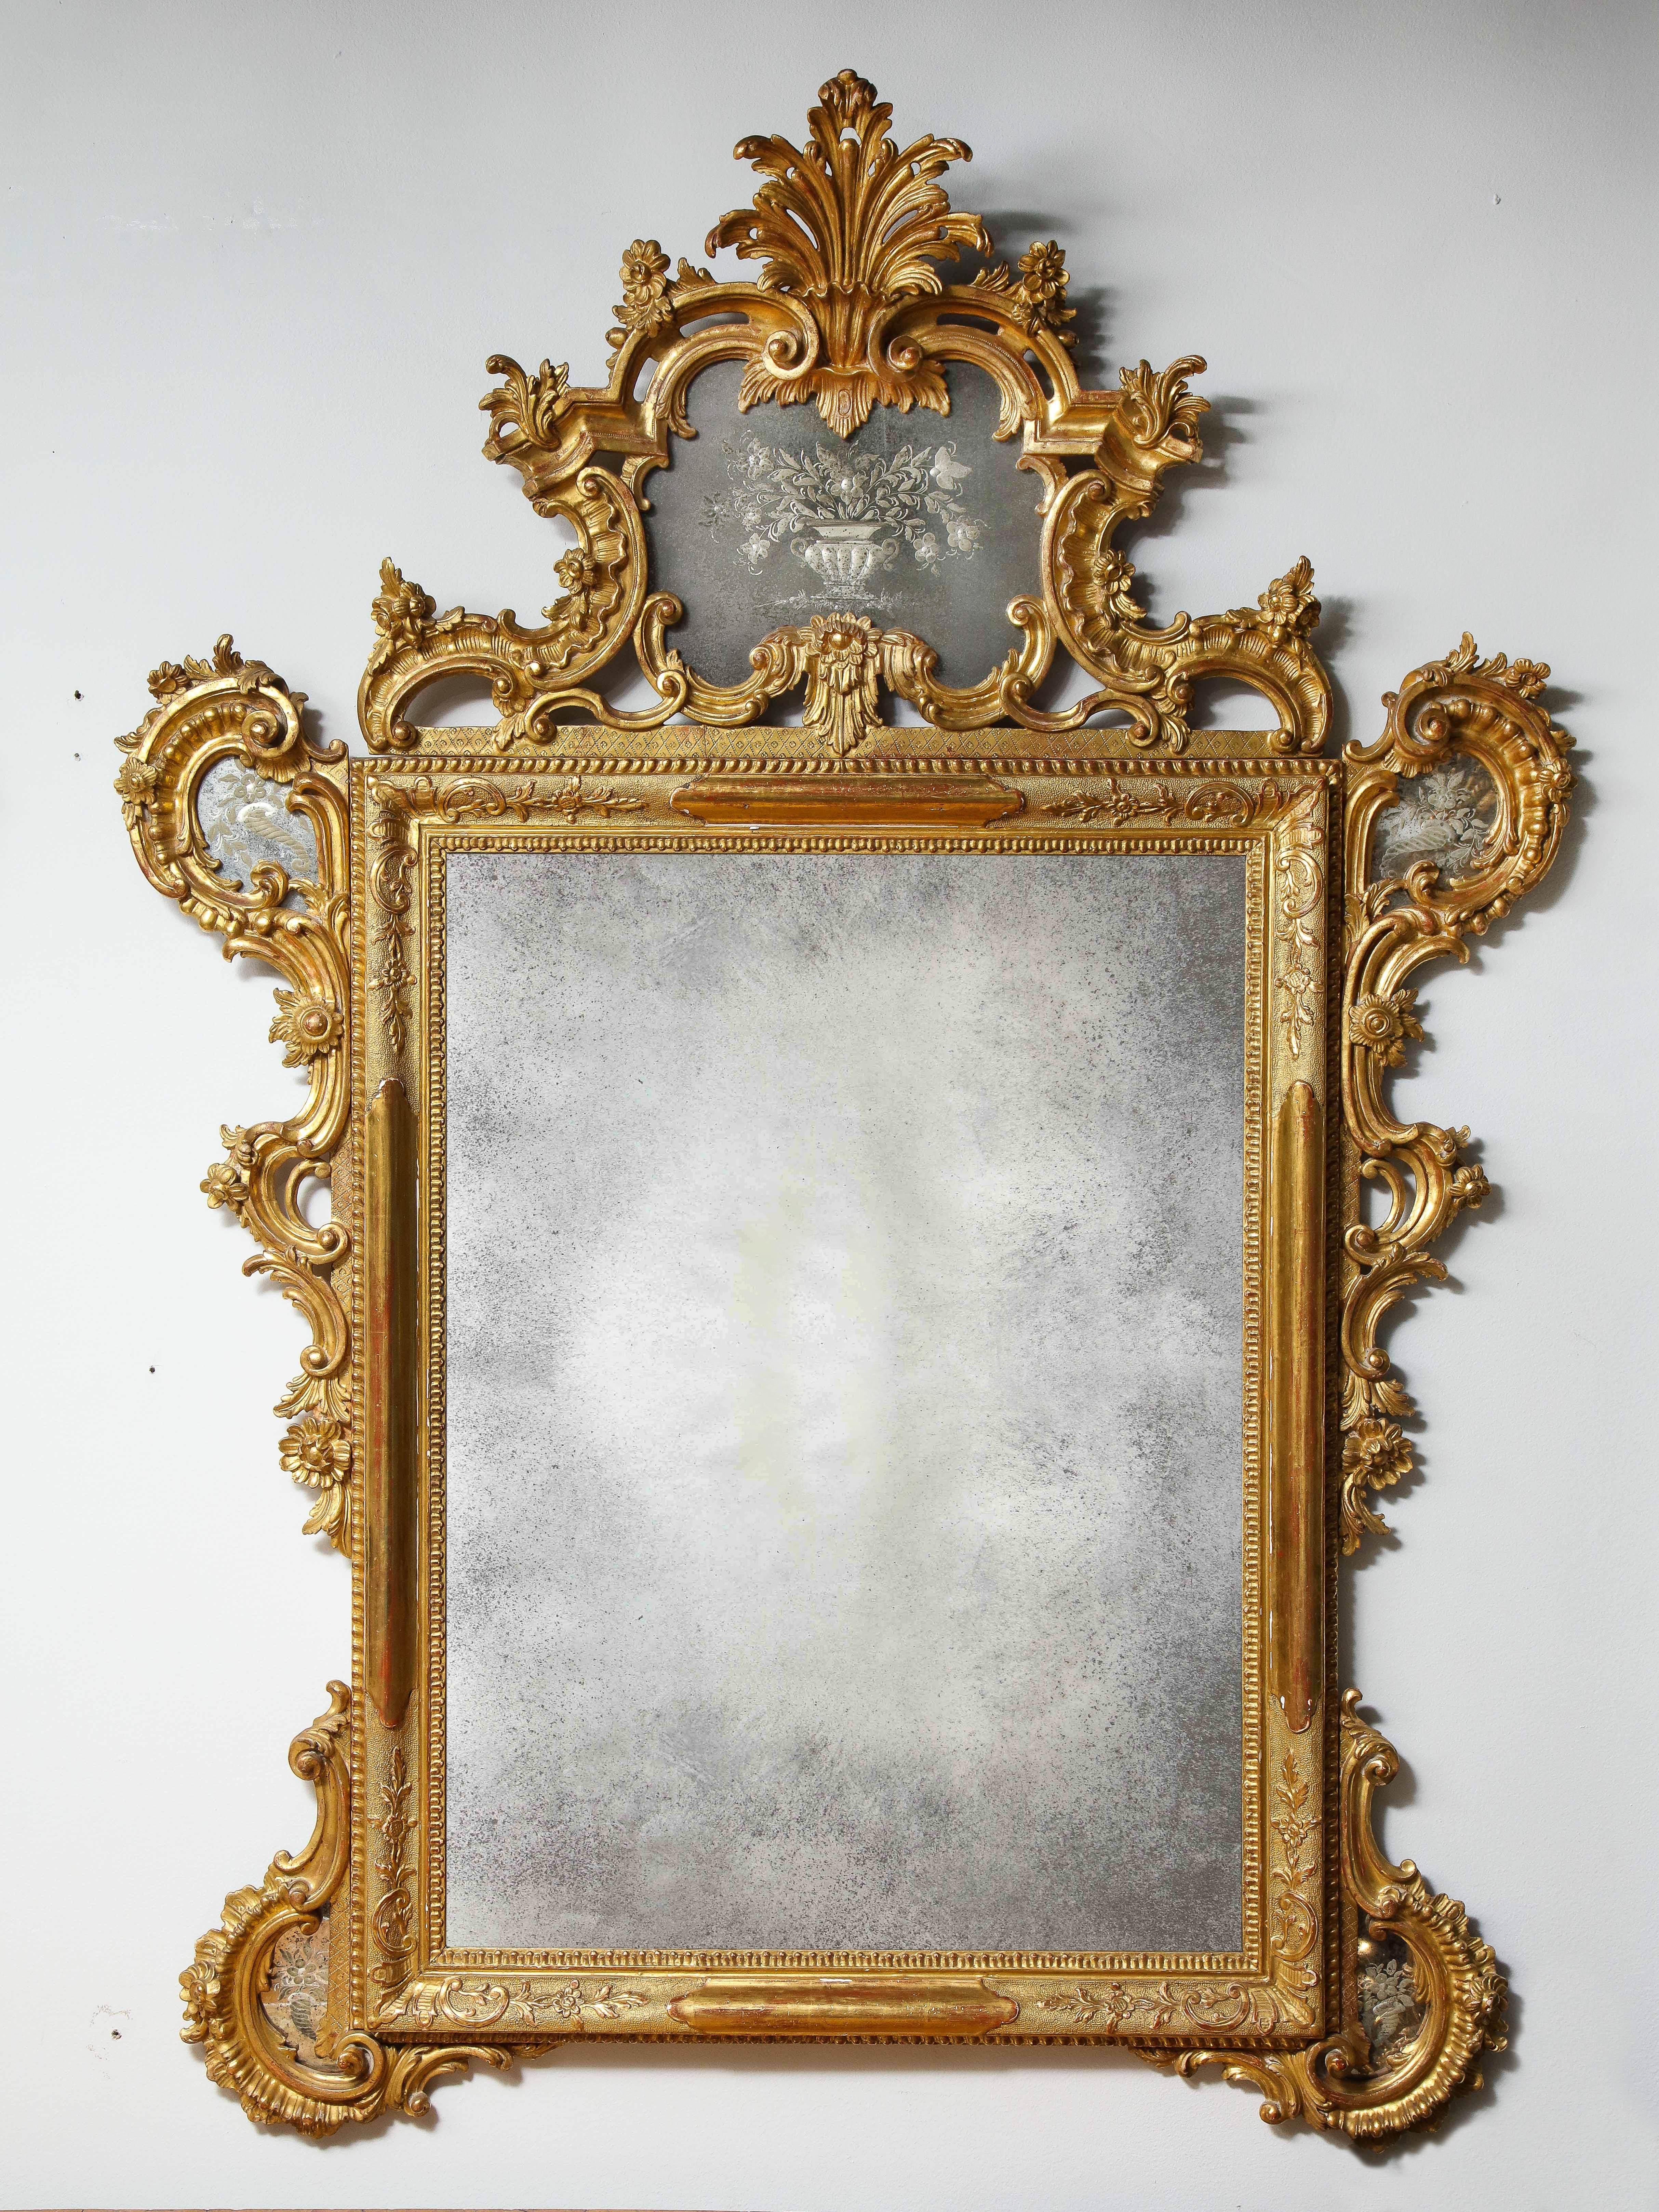 A fantastic and large pair of 19th century Louis XV/Roccoco style Italian Giltwood Venetian hand-etched and hand engraved mirrors. These gorgeous mirrors are all hand-carved with scrolling foliage, flowers, vines, acanthus leaf finials, scrolling